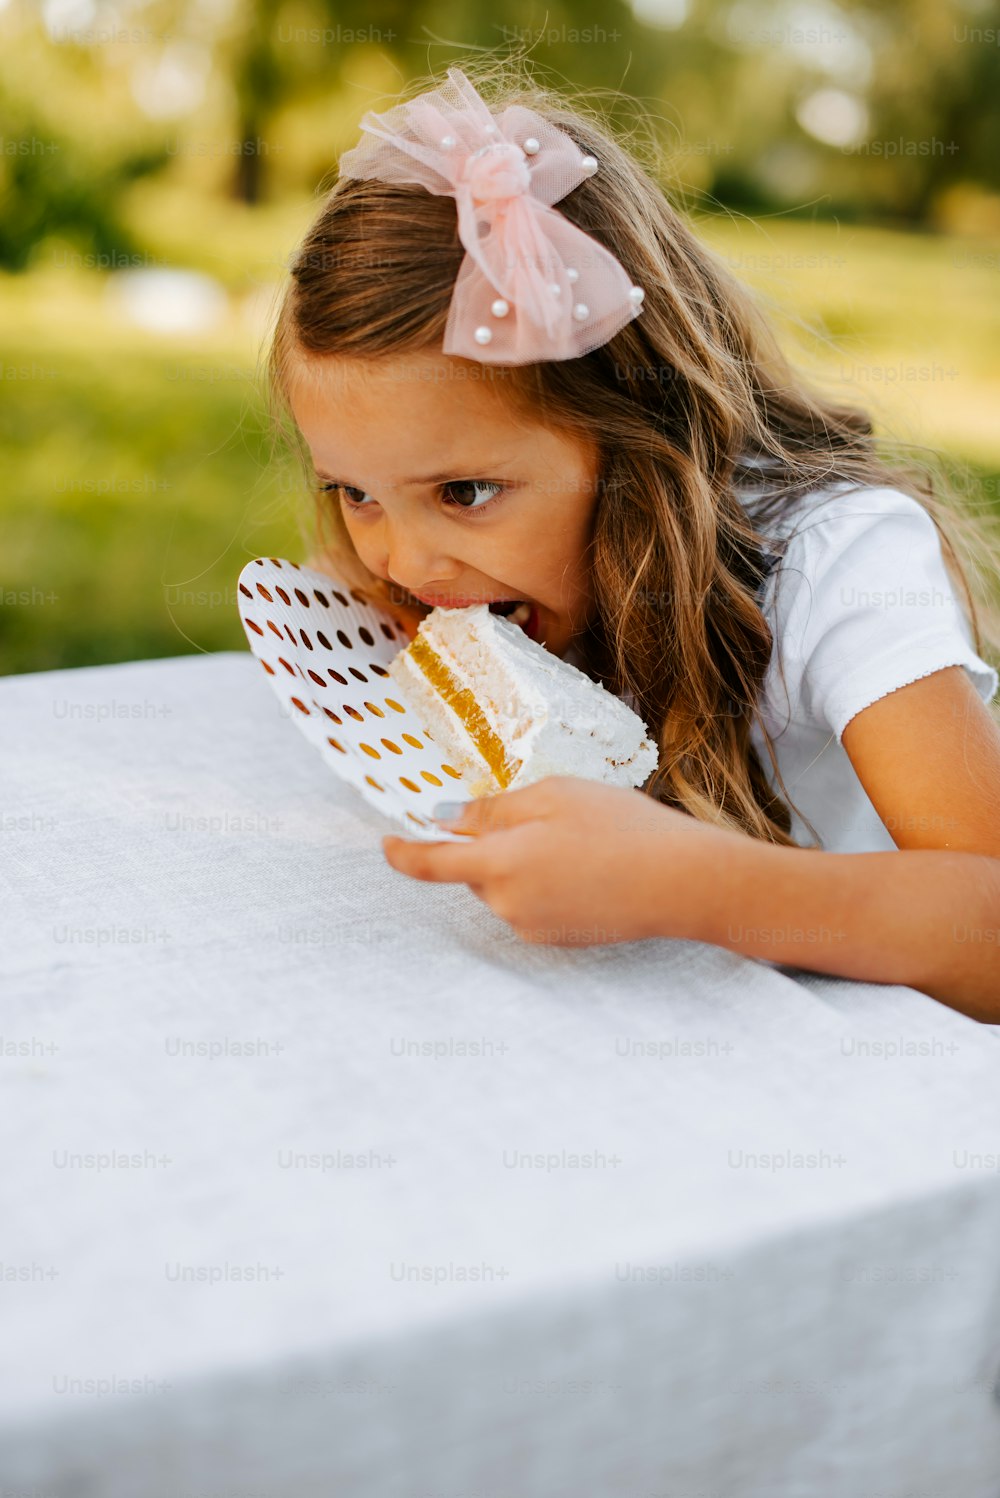 a little girl sitting at a table eating a piece of cake